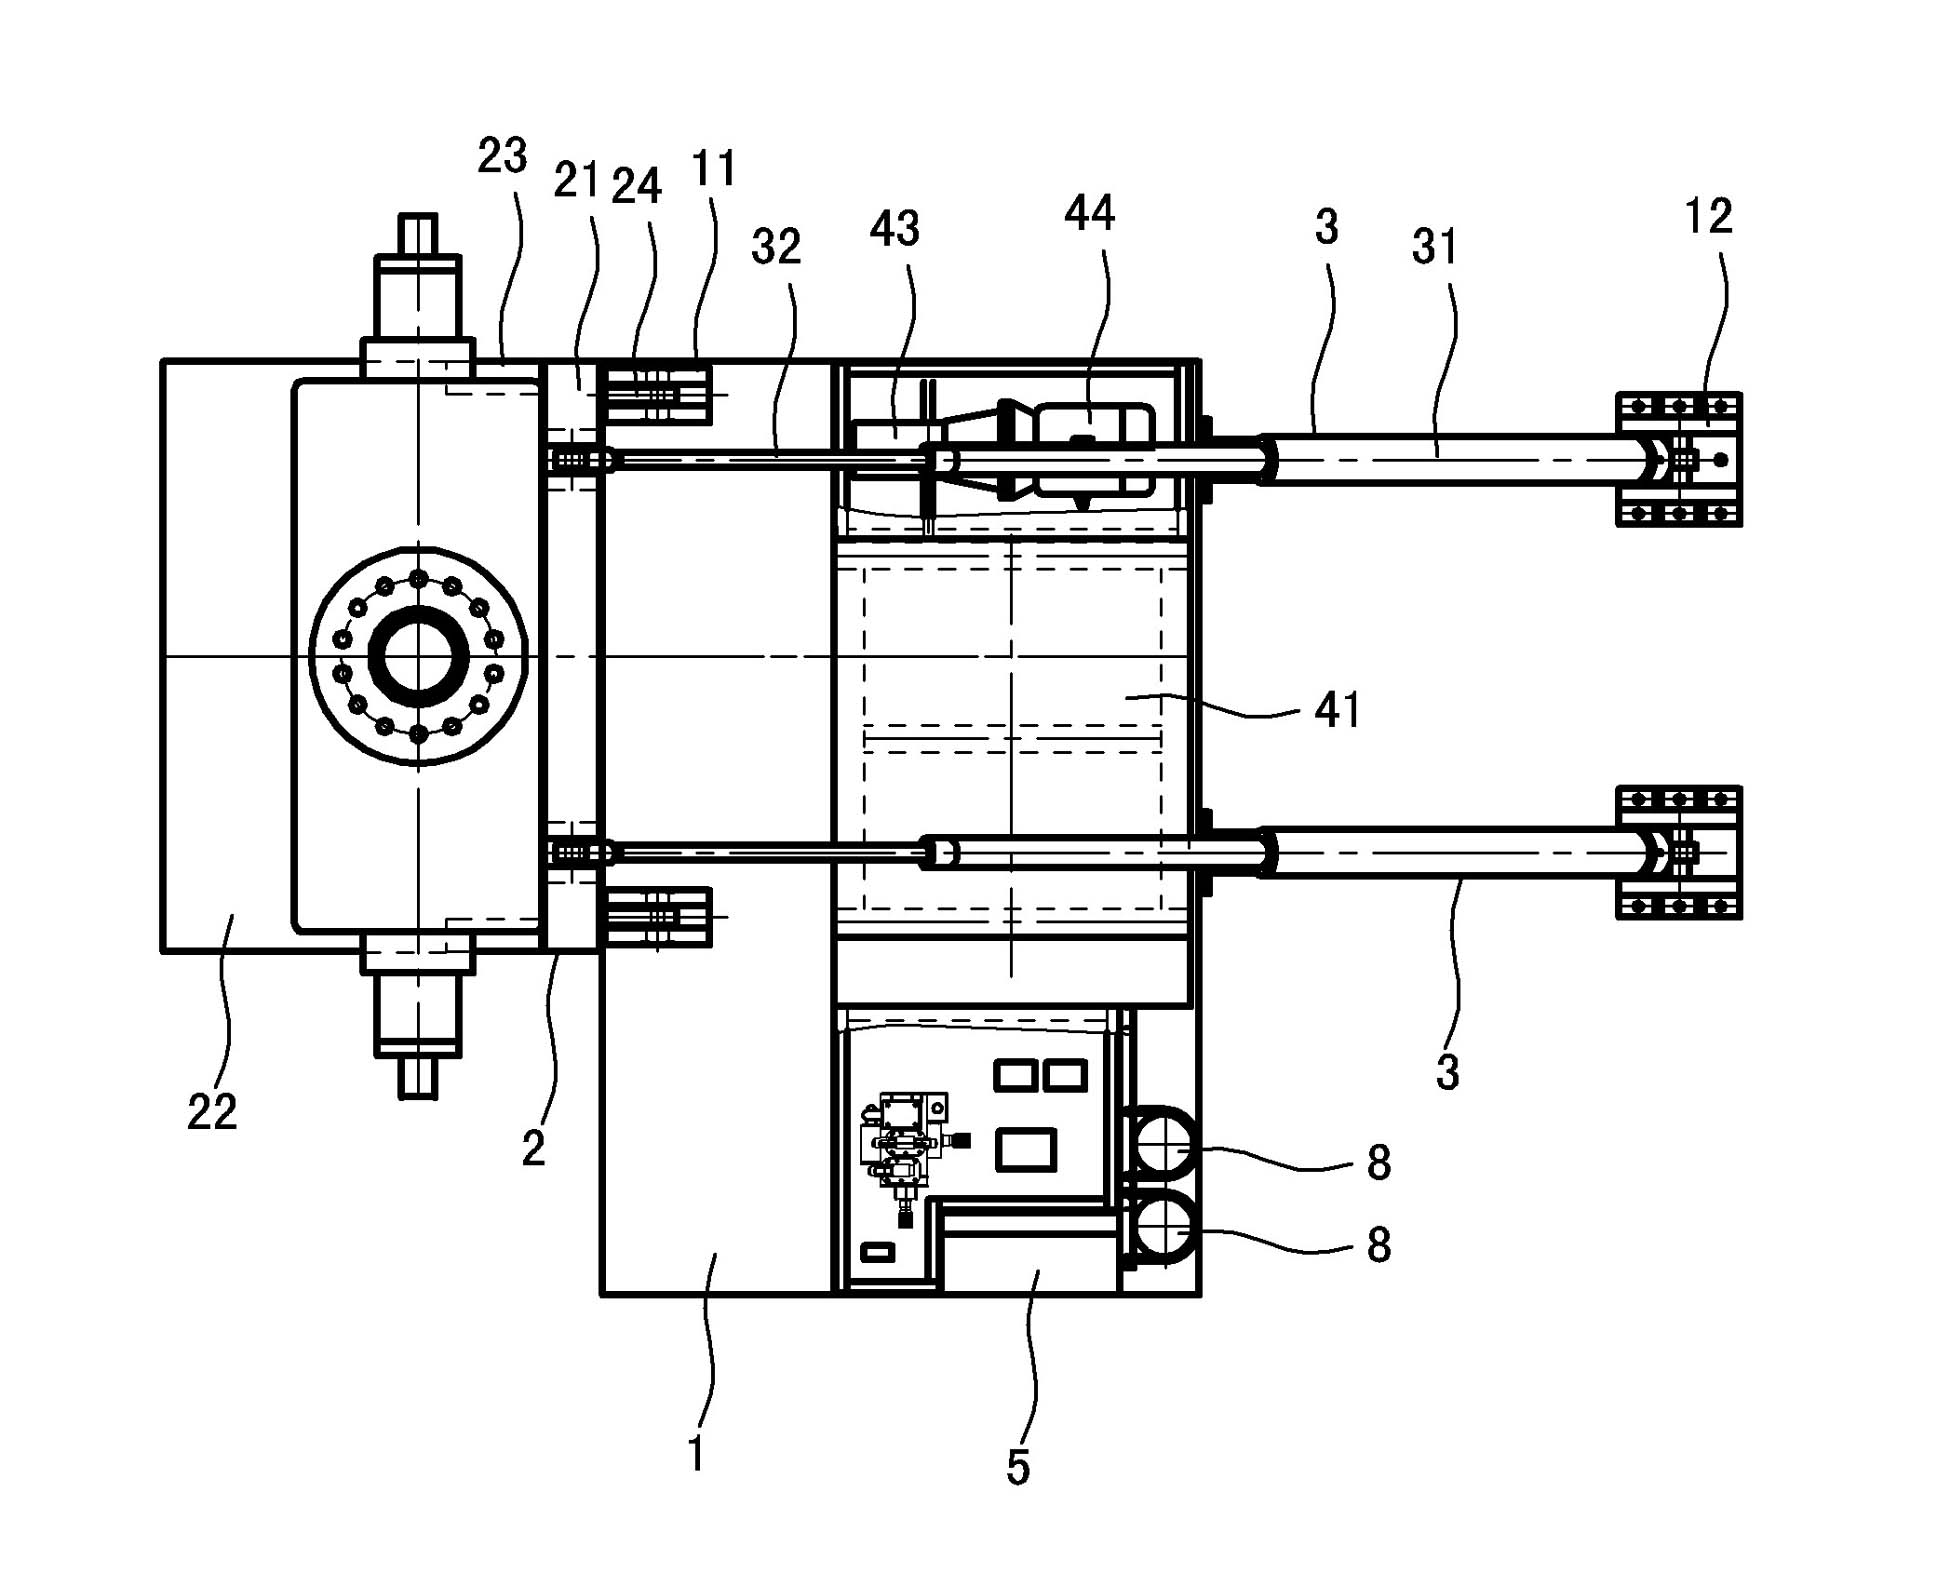 Blowout preventer turning system